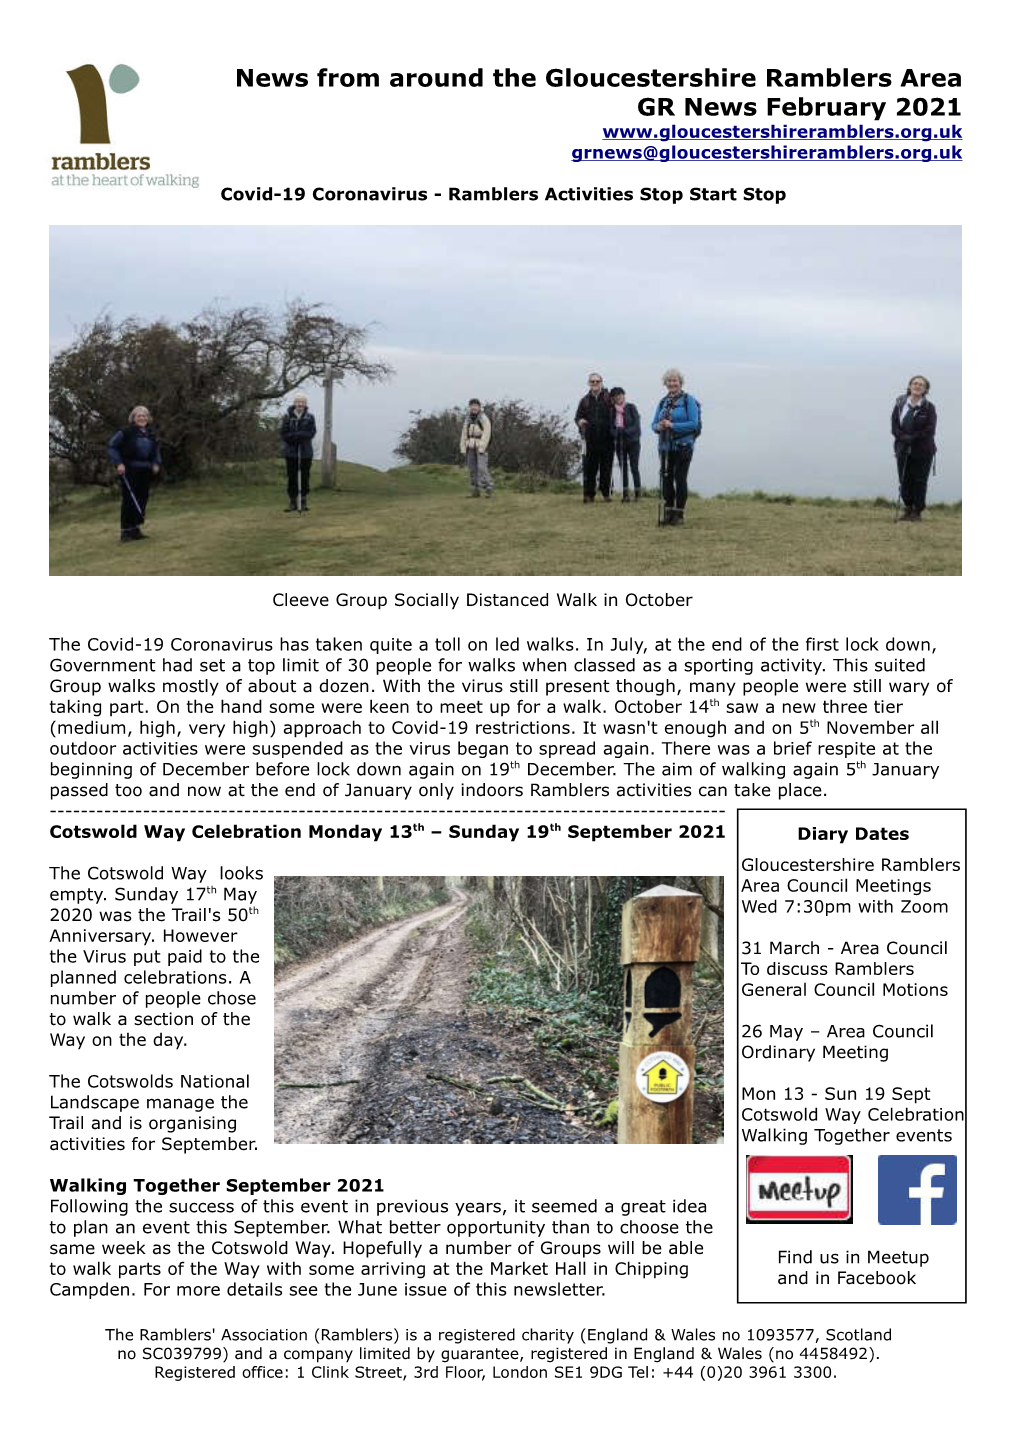 News from Around the Gloucestershire Ramblers Area GR News February 2021 Grnews@Gloucestershireramblers.Org.Uk